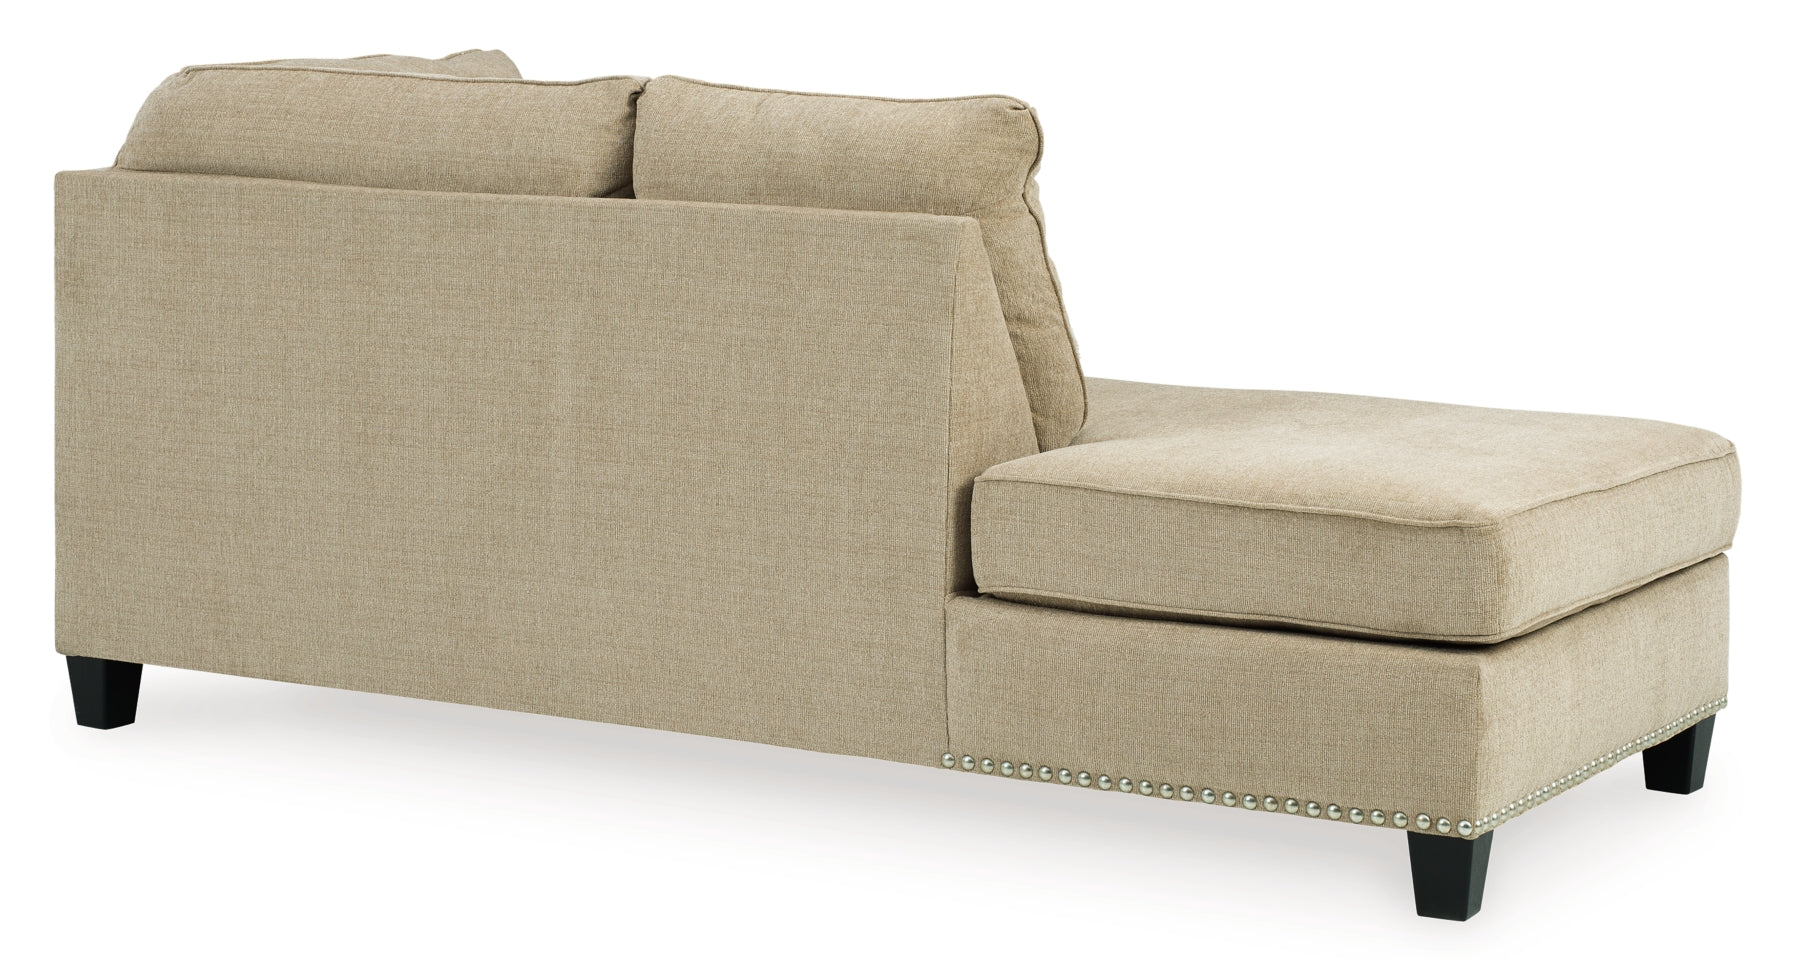 Dovemont 2-Piece Sectional with Ottoman - PKG008202 - furniture place usa